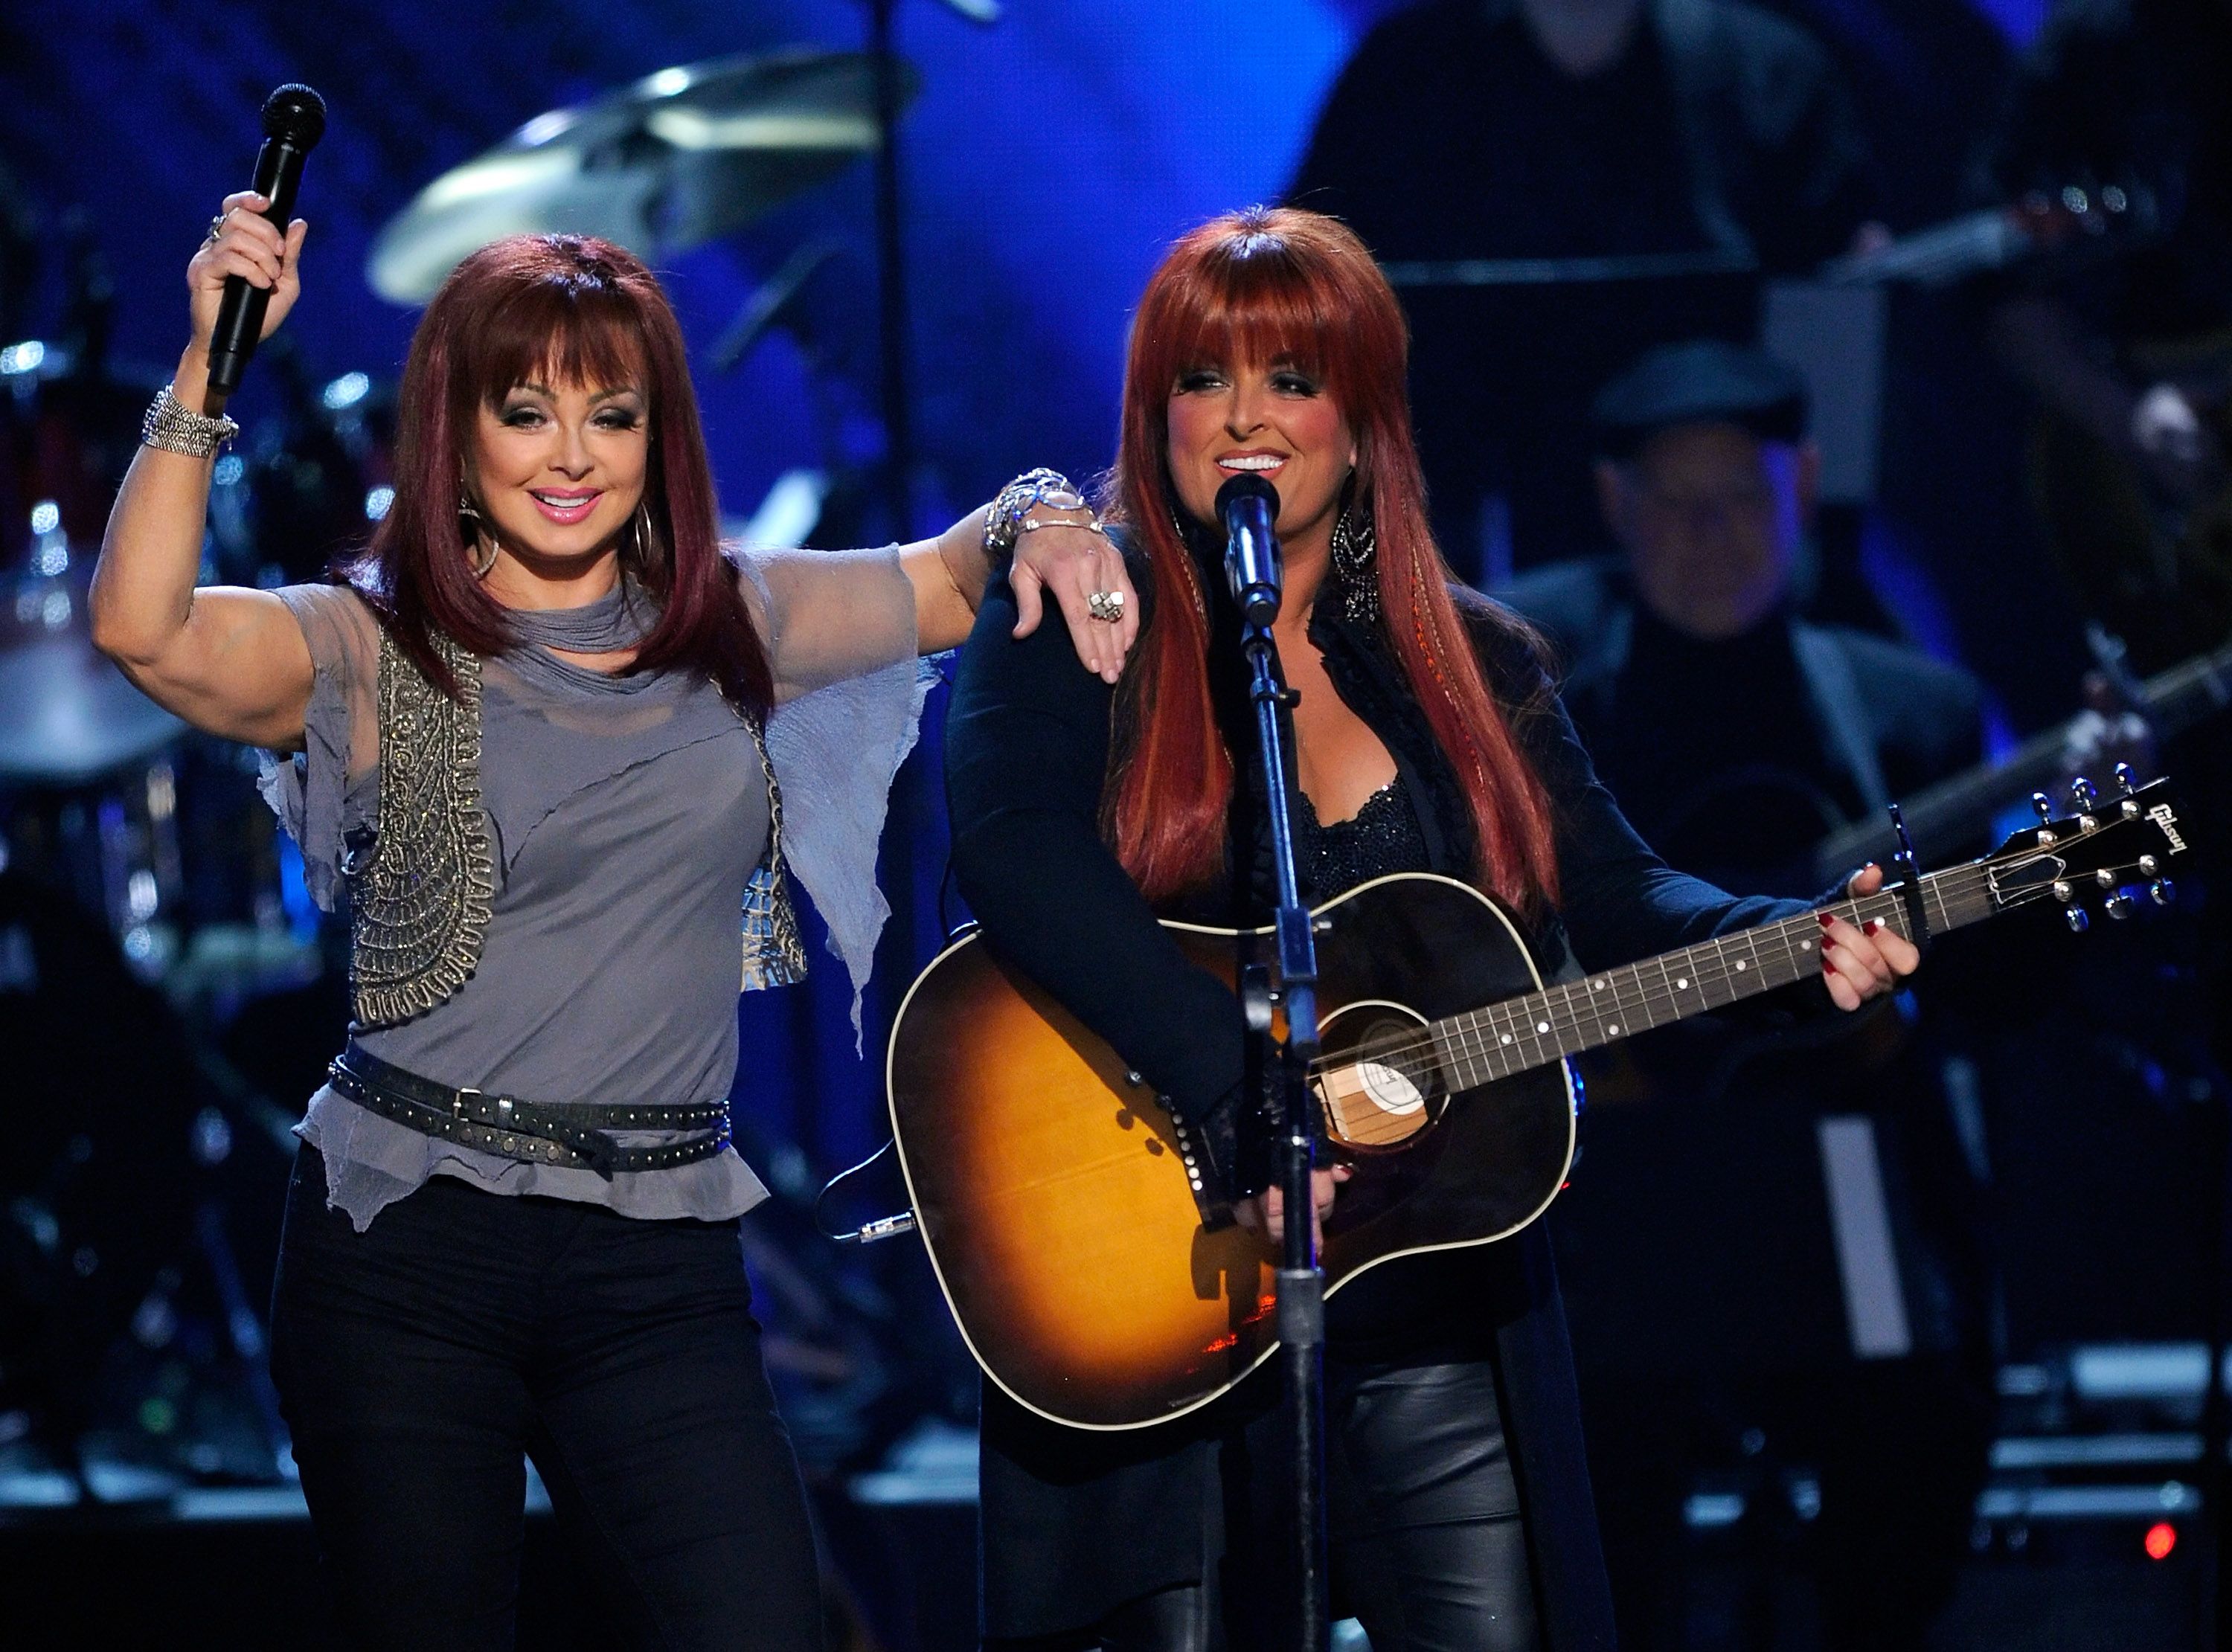 Naomi Judd and Wynonna Judd during ACM Presents: Girls' Night Out: Superstar Women of Country concert held at the MGM Grand Garden Arena on April 4, 2011 in Las Vegas, Nevada. | Source: Getty Images